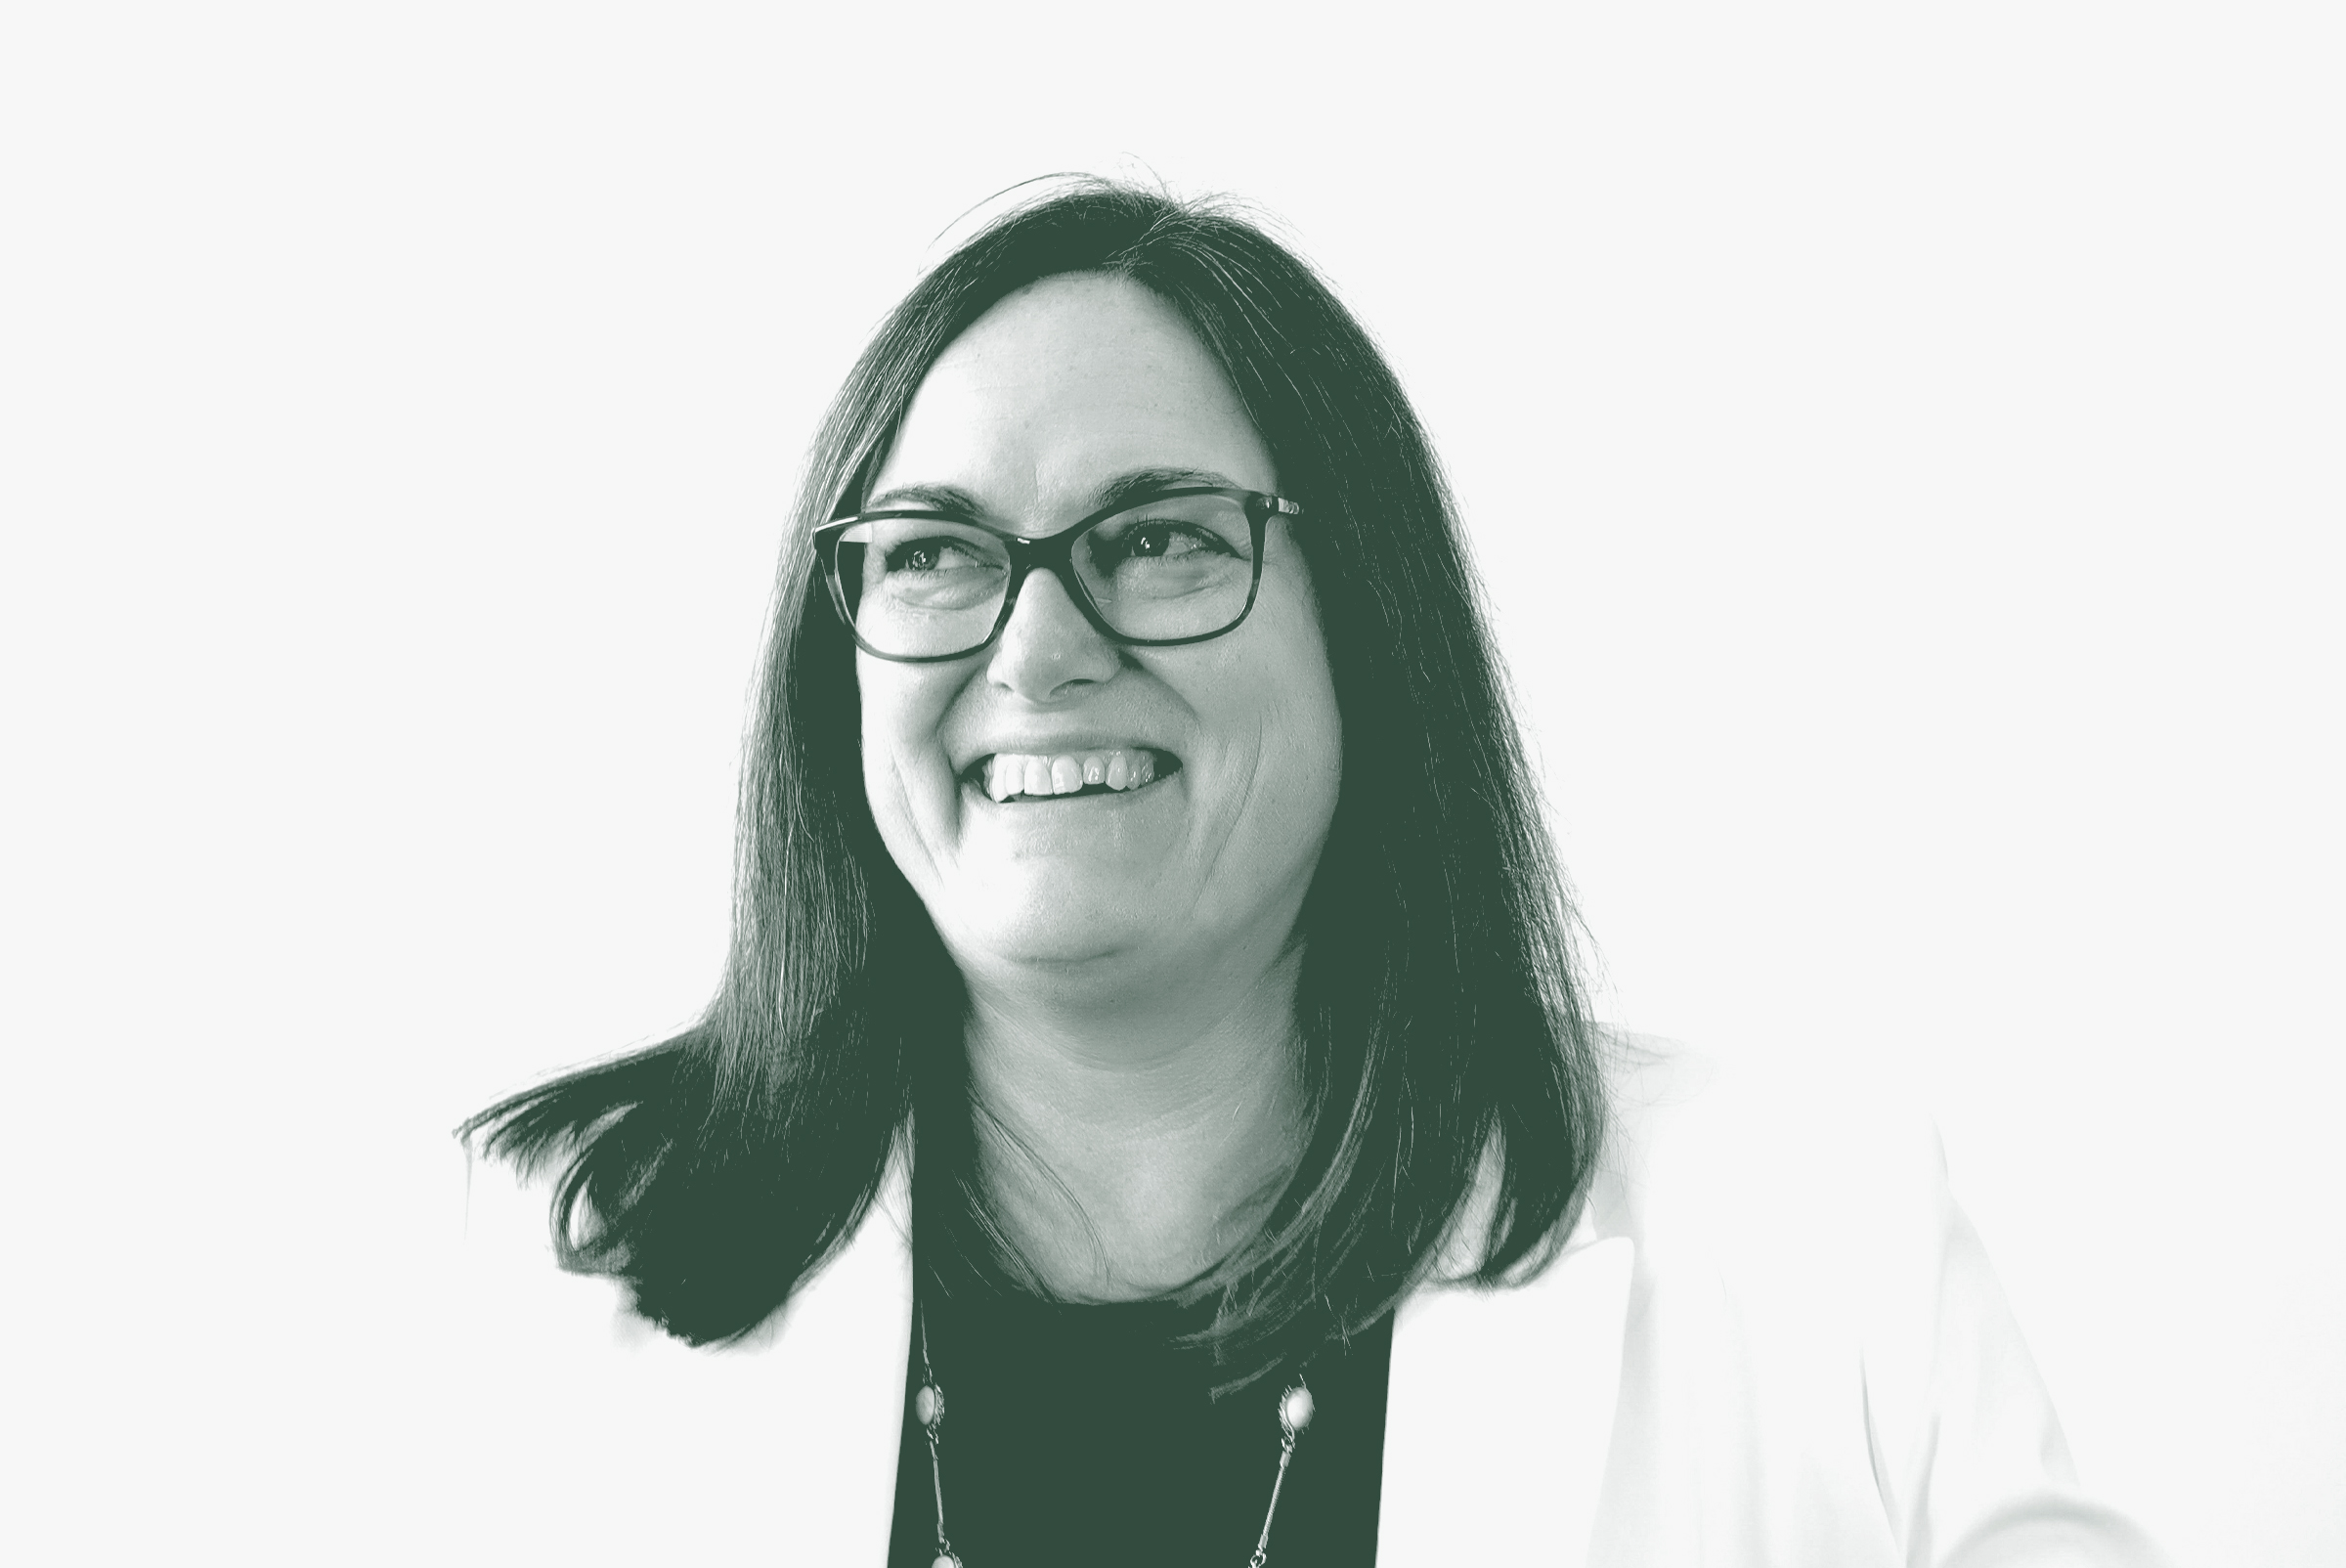 A black and white portrait of Laura Cornell, an Associate Principal and the Director of Landscape Architecture with GFF in the Landscape Architecture Studio, in front of a white background.